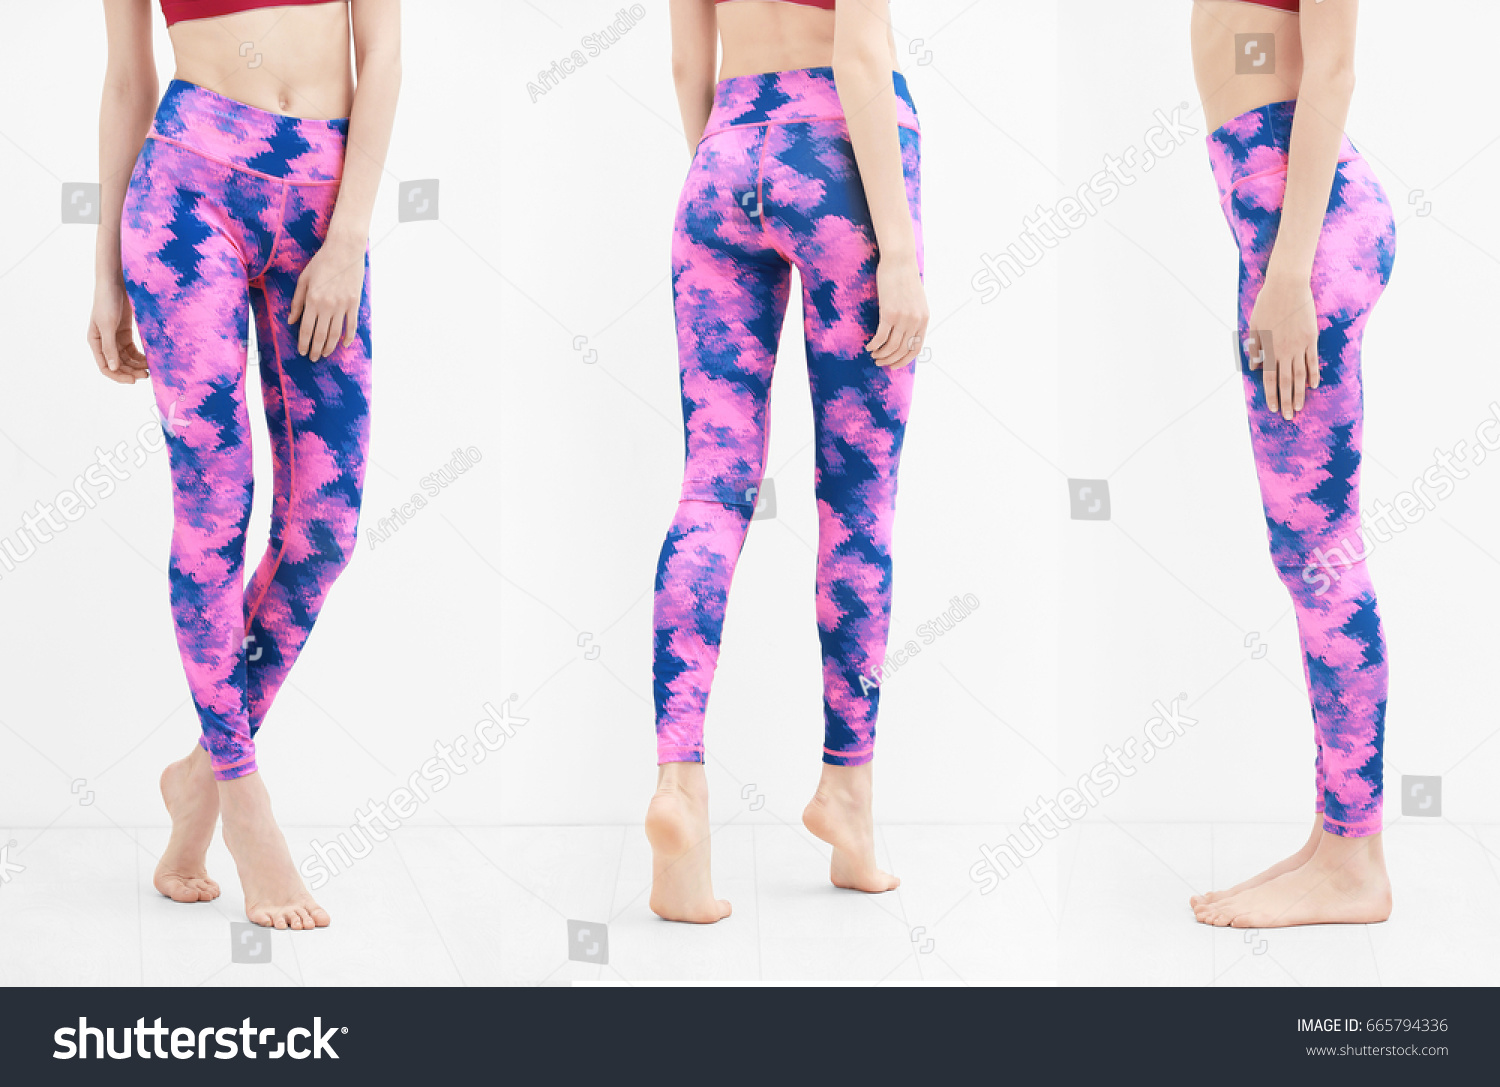 Different views of young woman in sport pants on white background #665794336